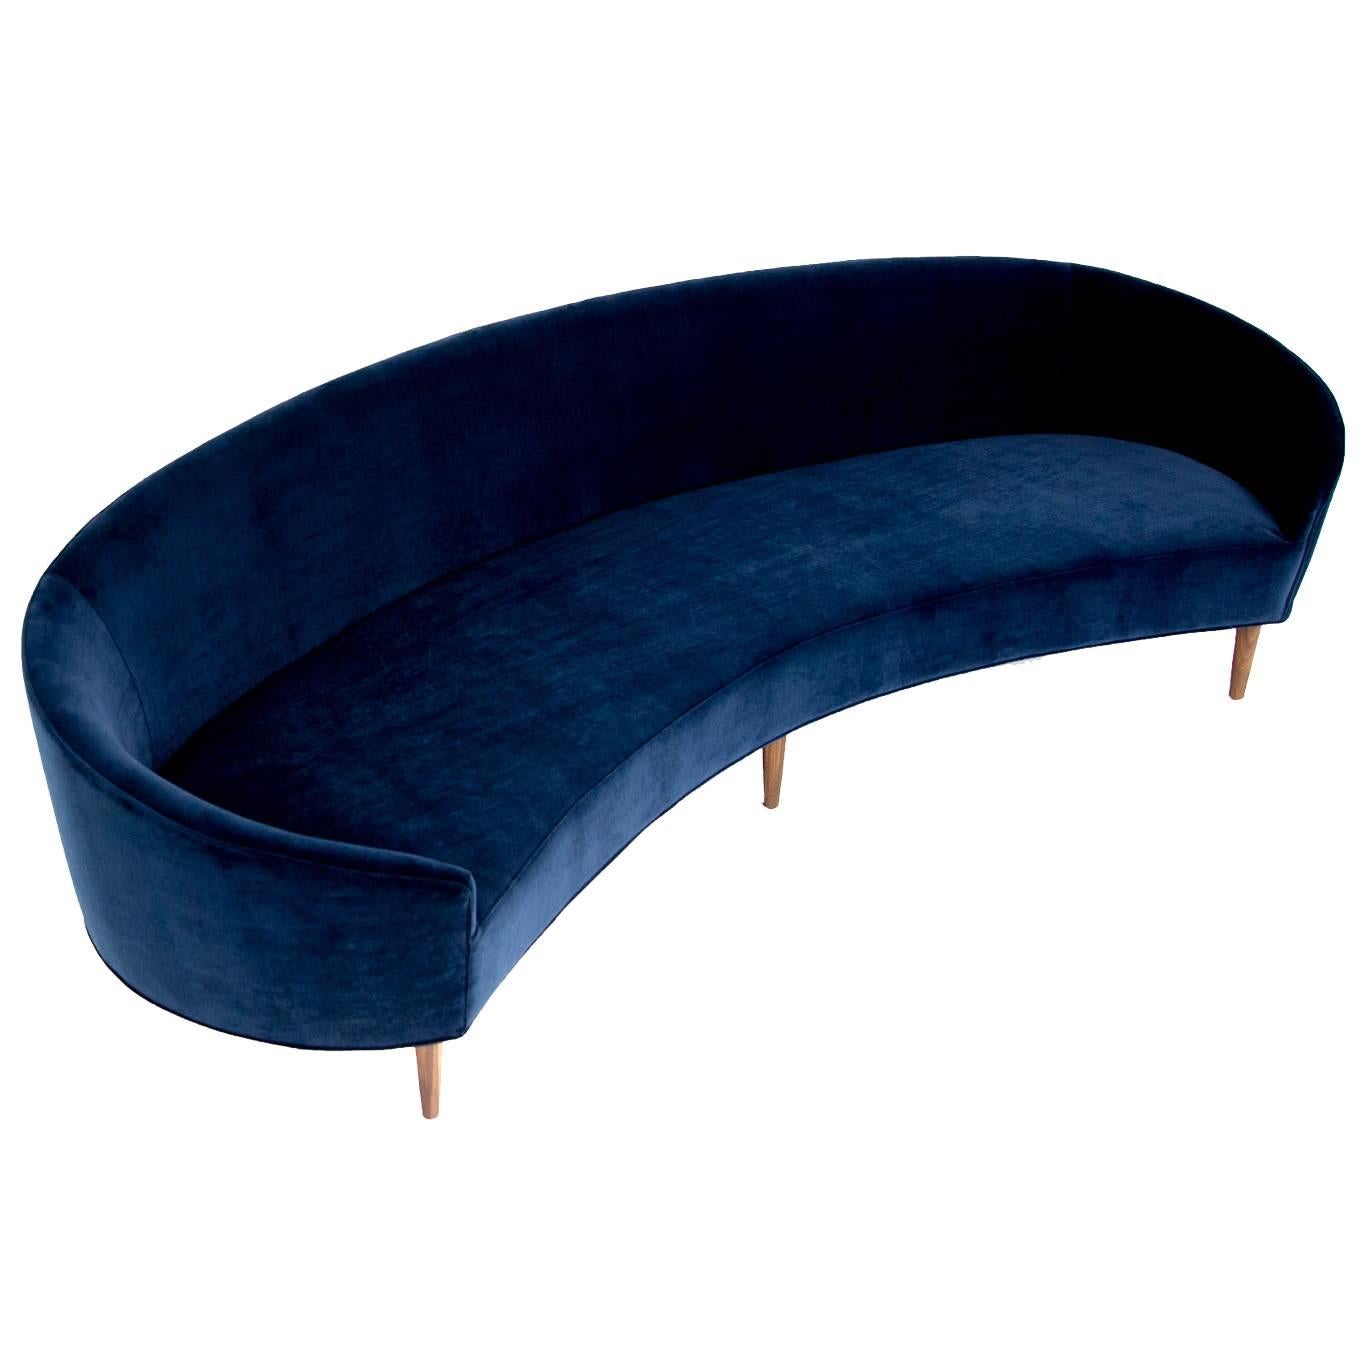 Art Deco Style Crescent Sofa with Walnut Legs in Navy Blue Velvet For Sale